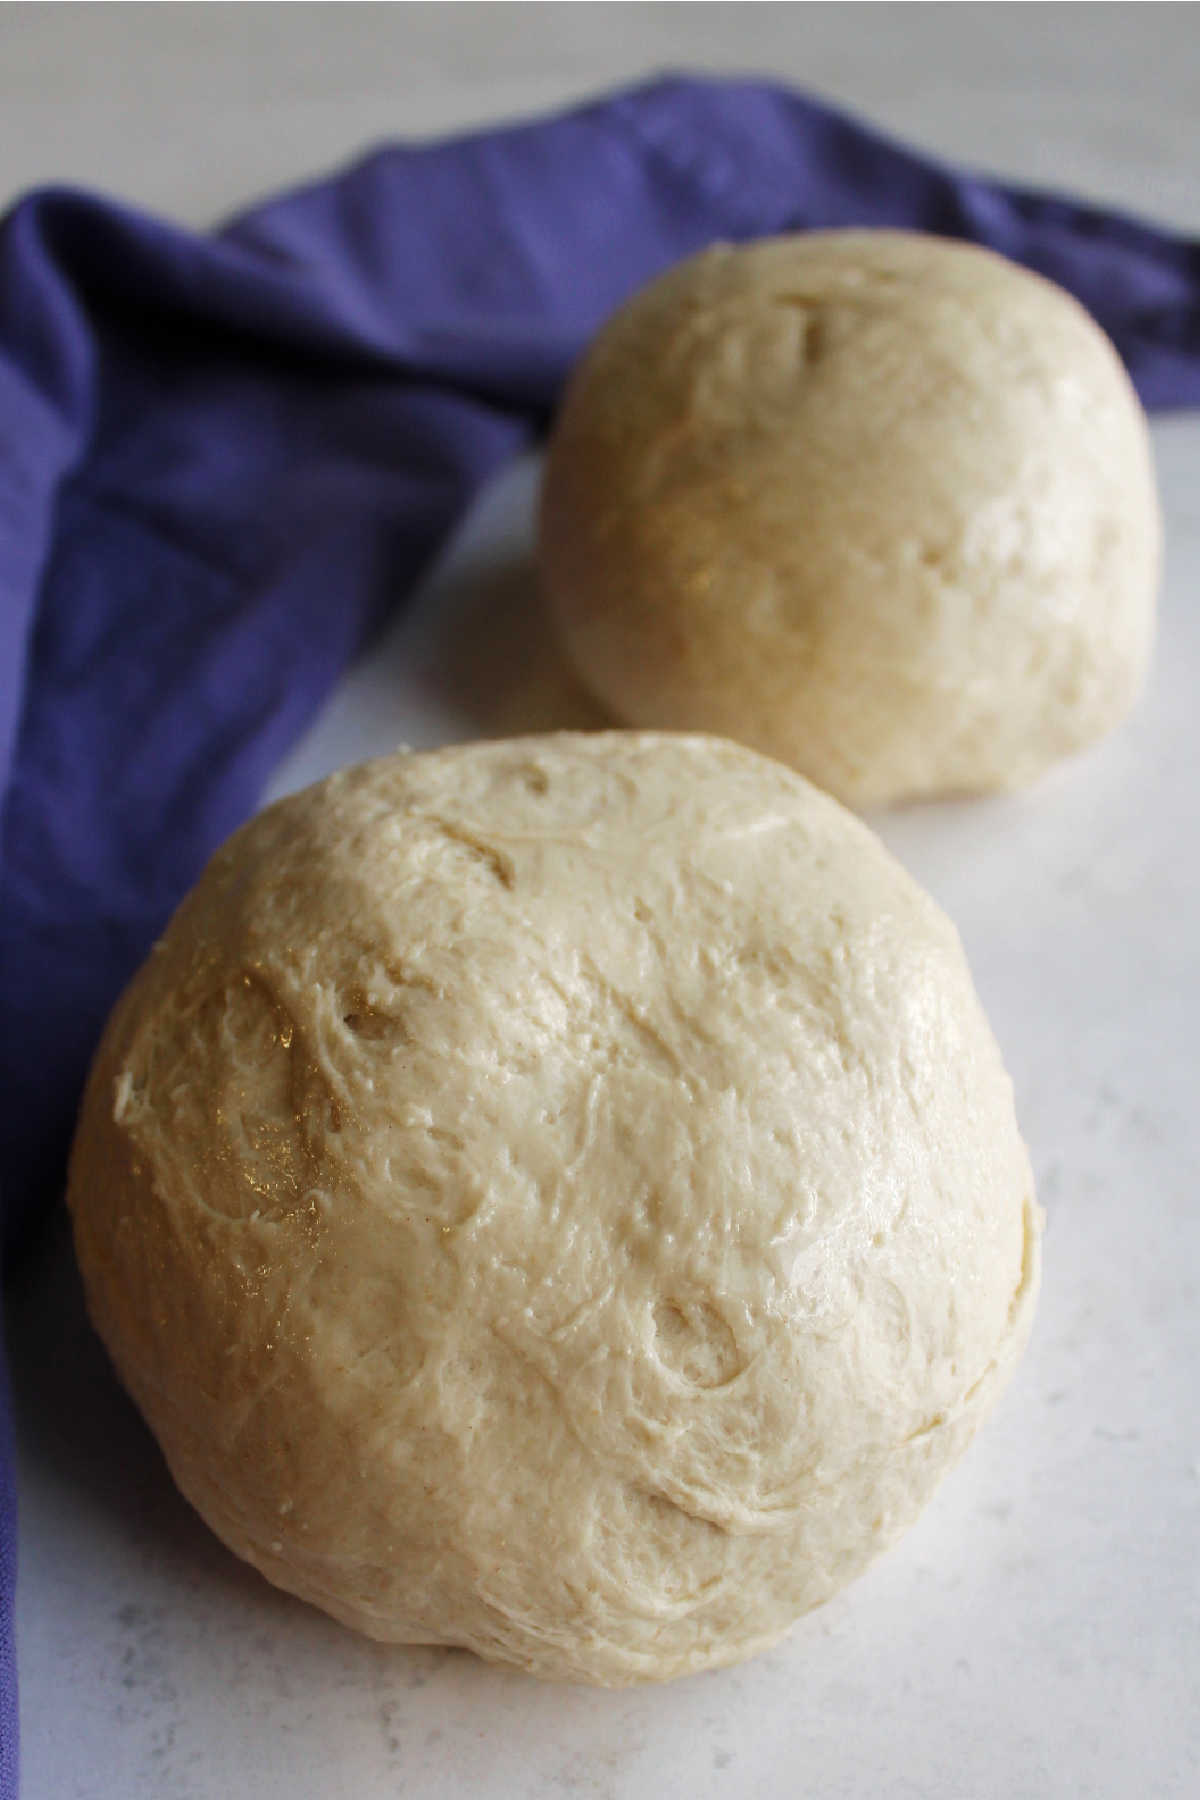 Two balls of sourdough pizza crust, ready to be made into pizzas.